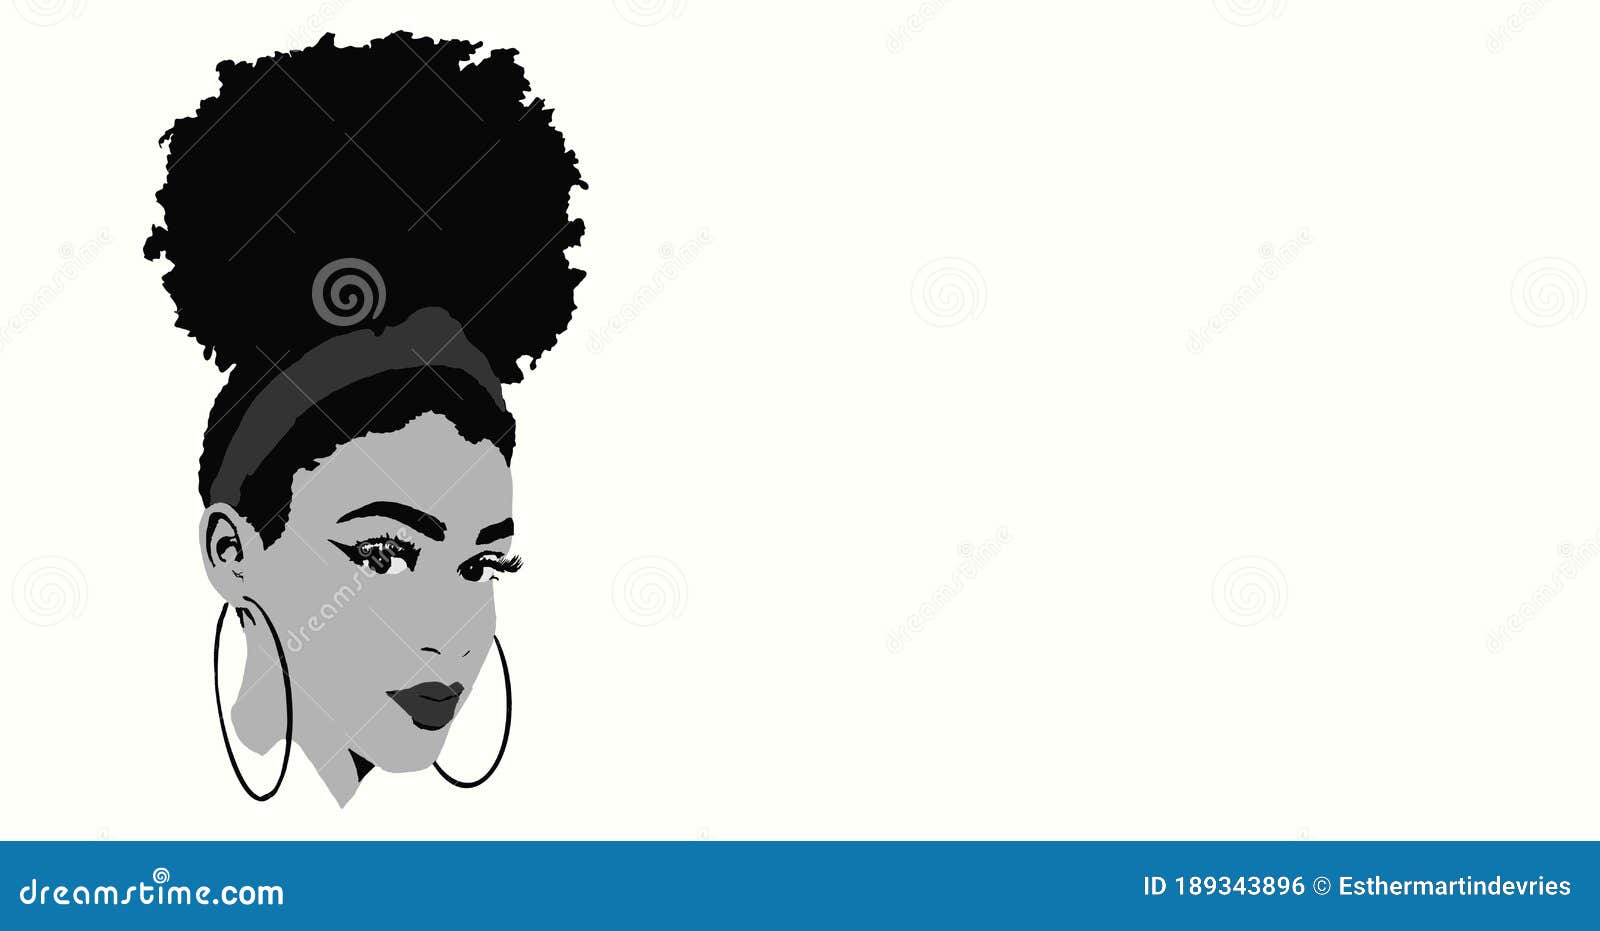 Cute Black African American Girl or Woman with High Puff Afro Hair Style  and Make Up Stock Illustration - Illustration of puff, text: 189343896